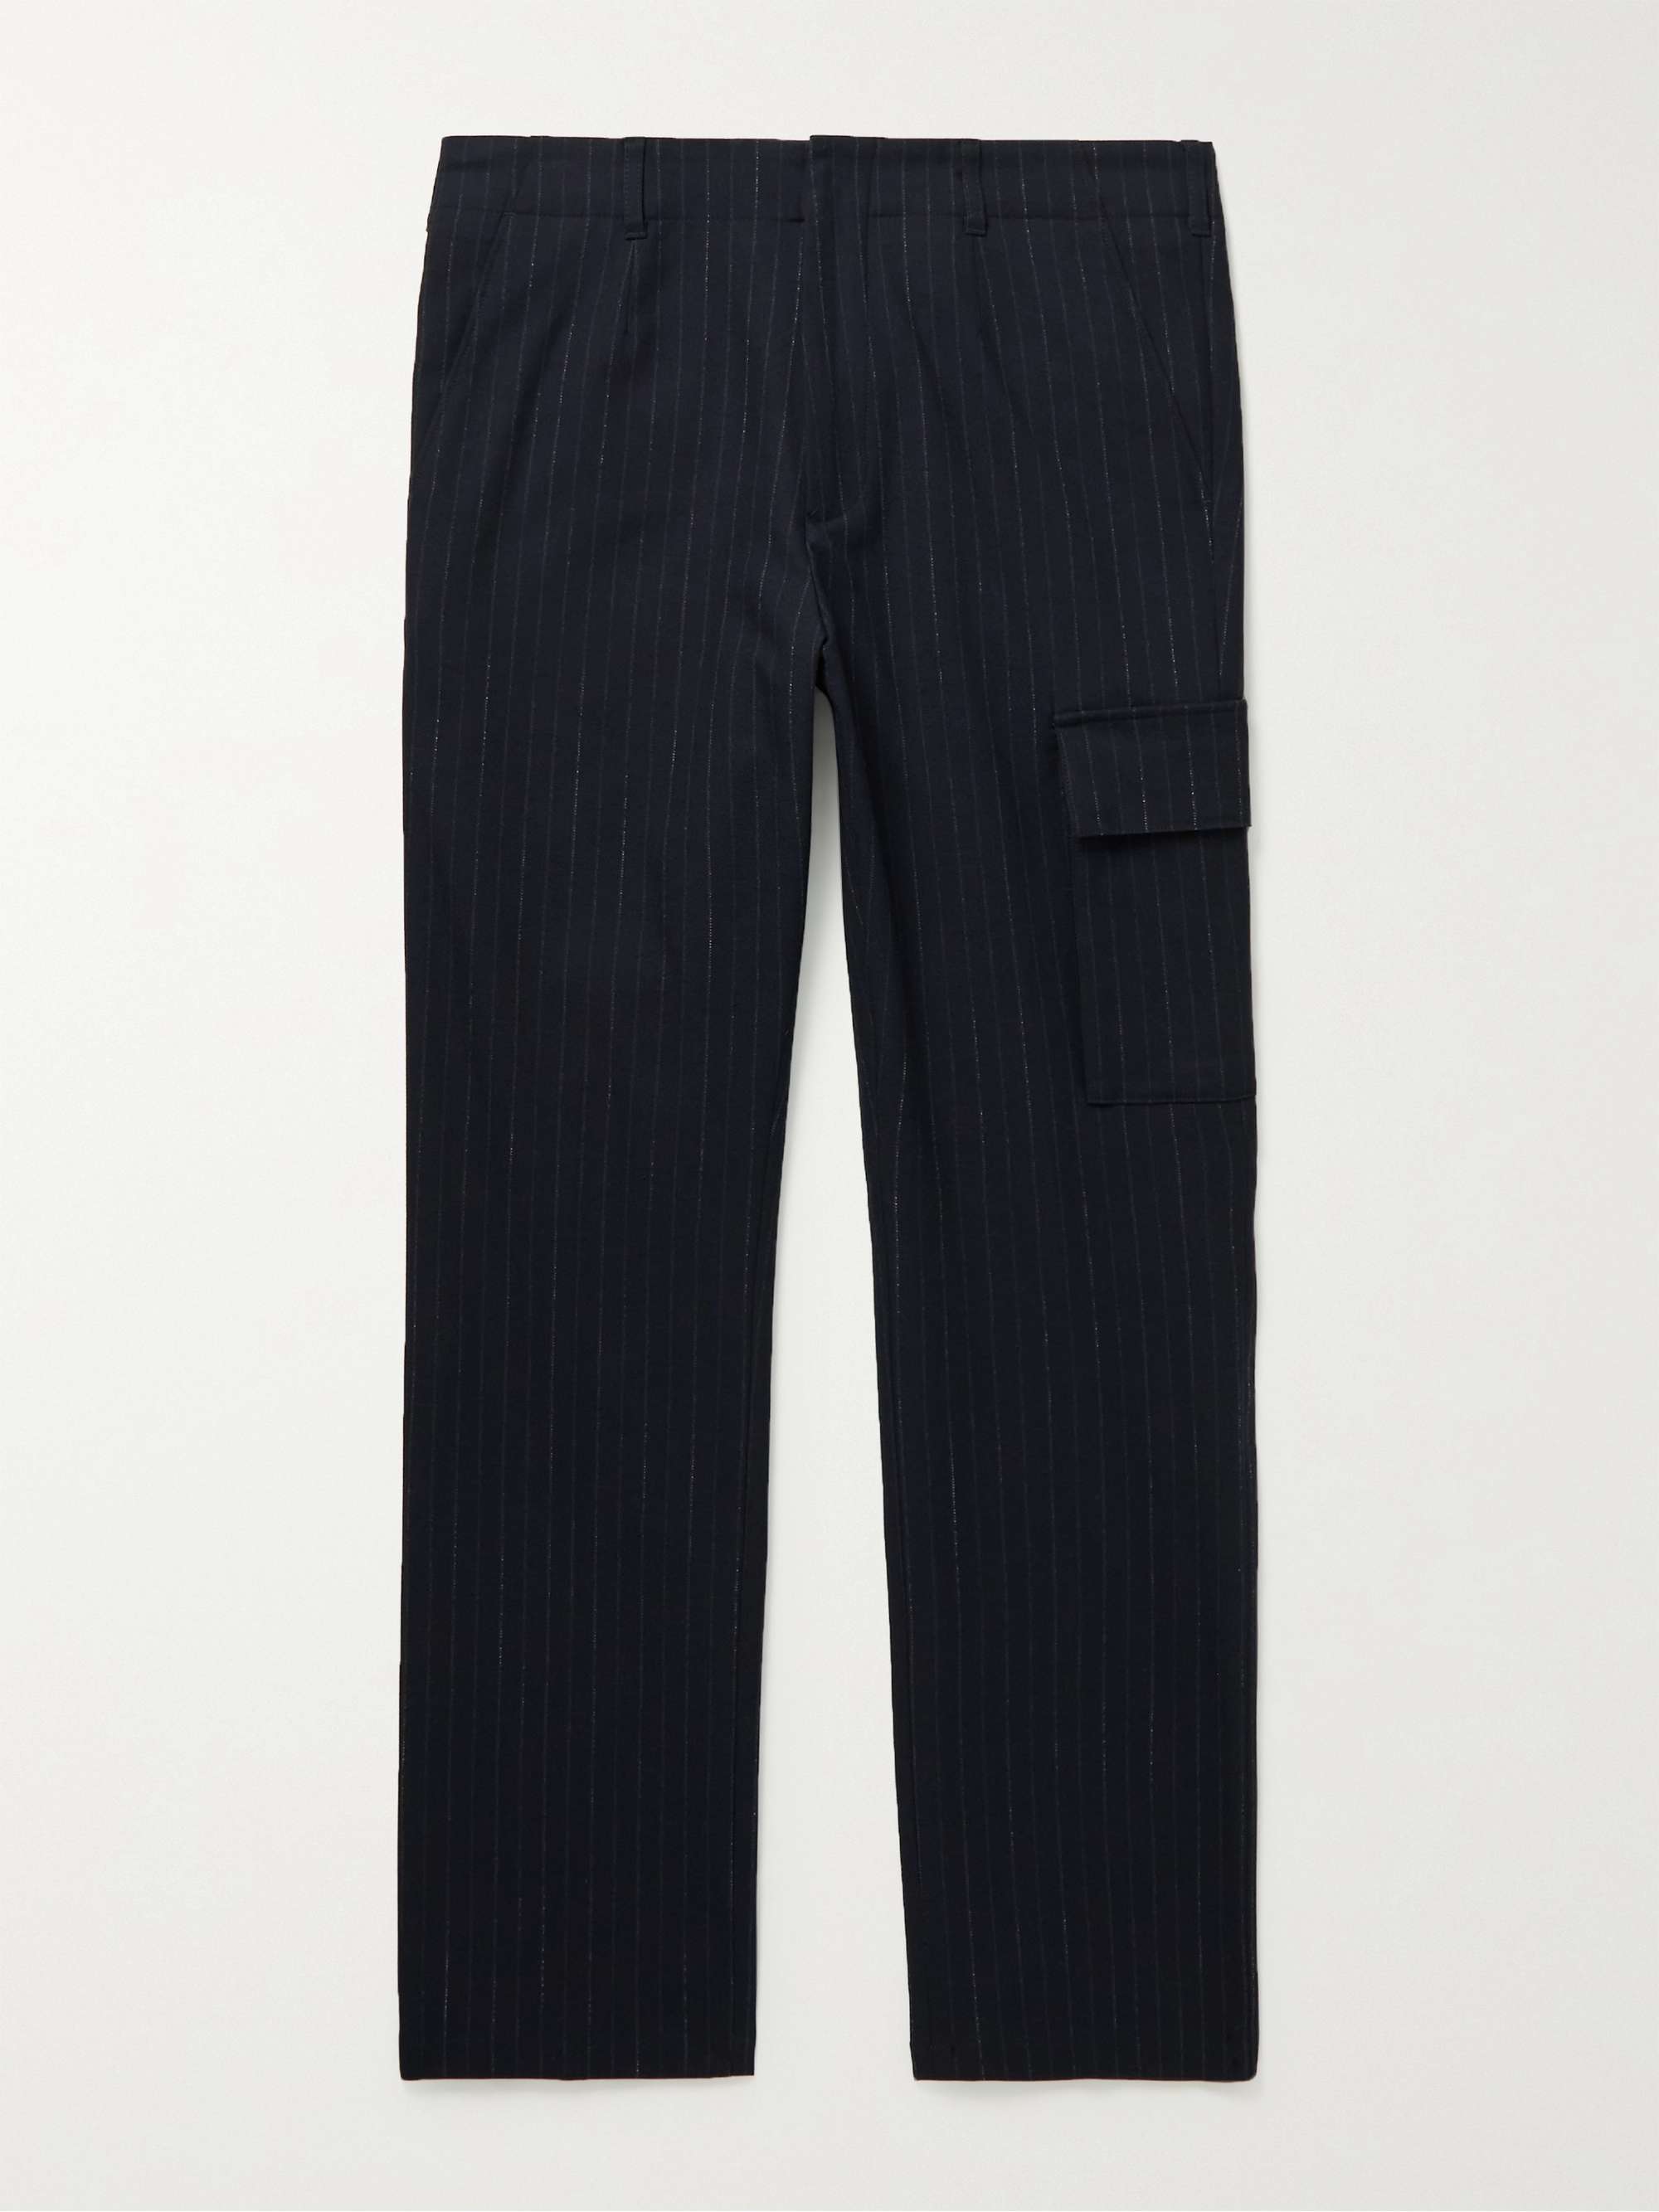 PAUL SMITH Slim-Fit Pinstriped Cotton-Blend Trousers